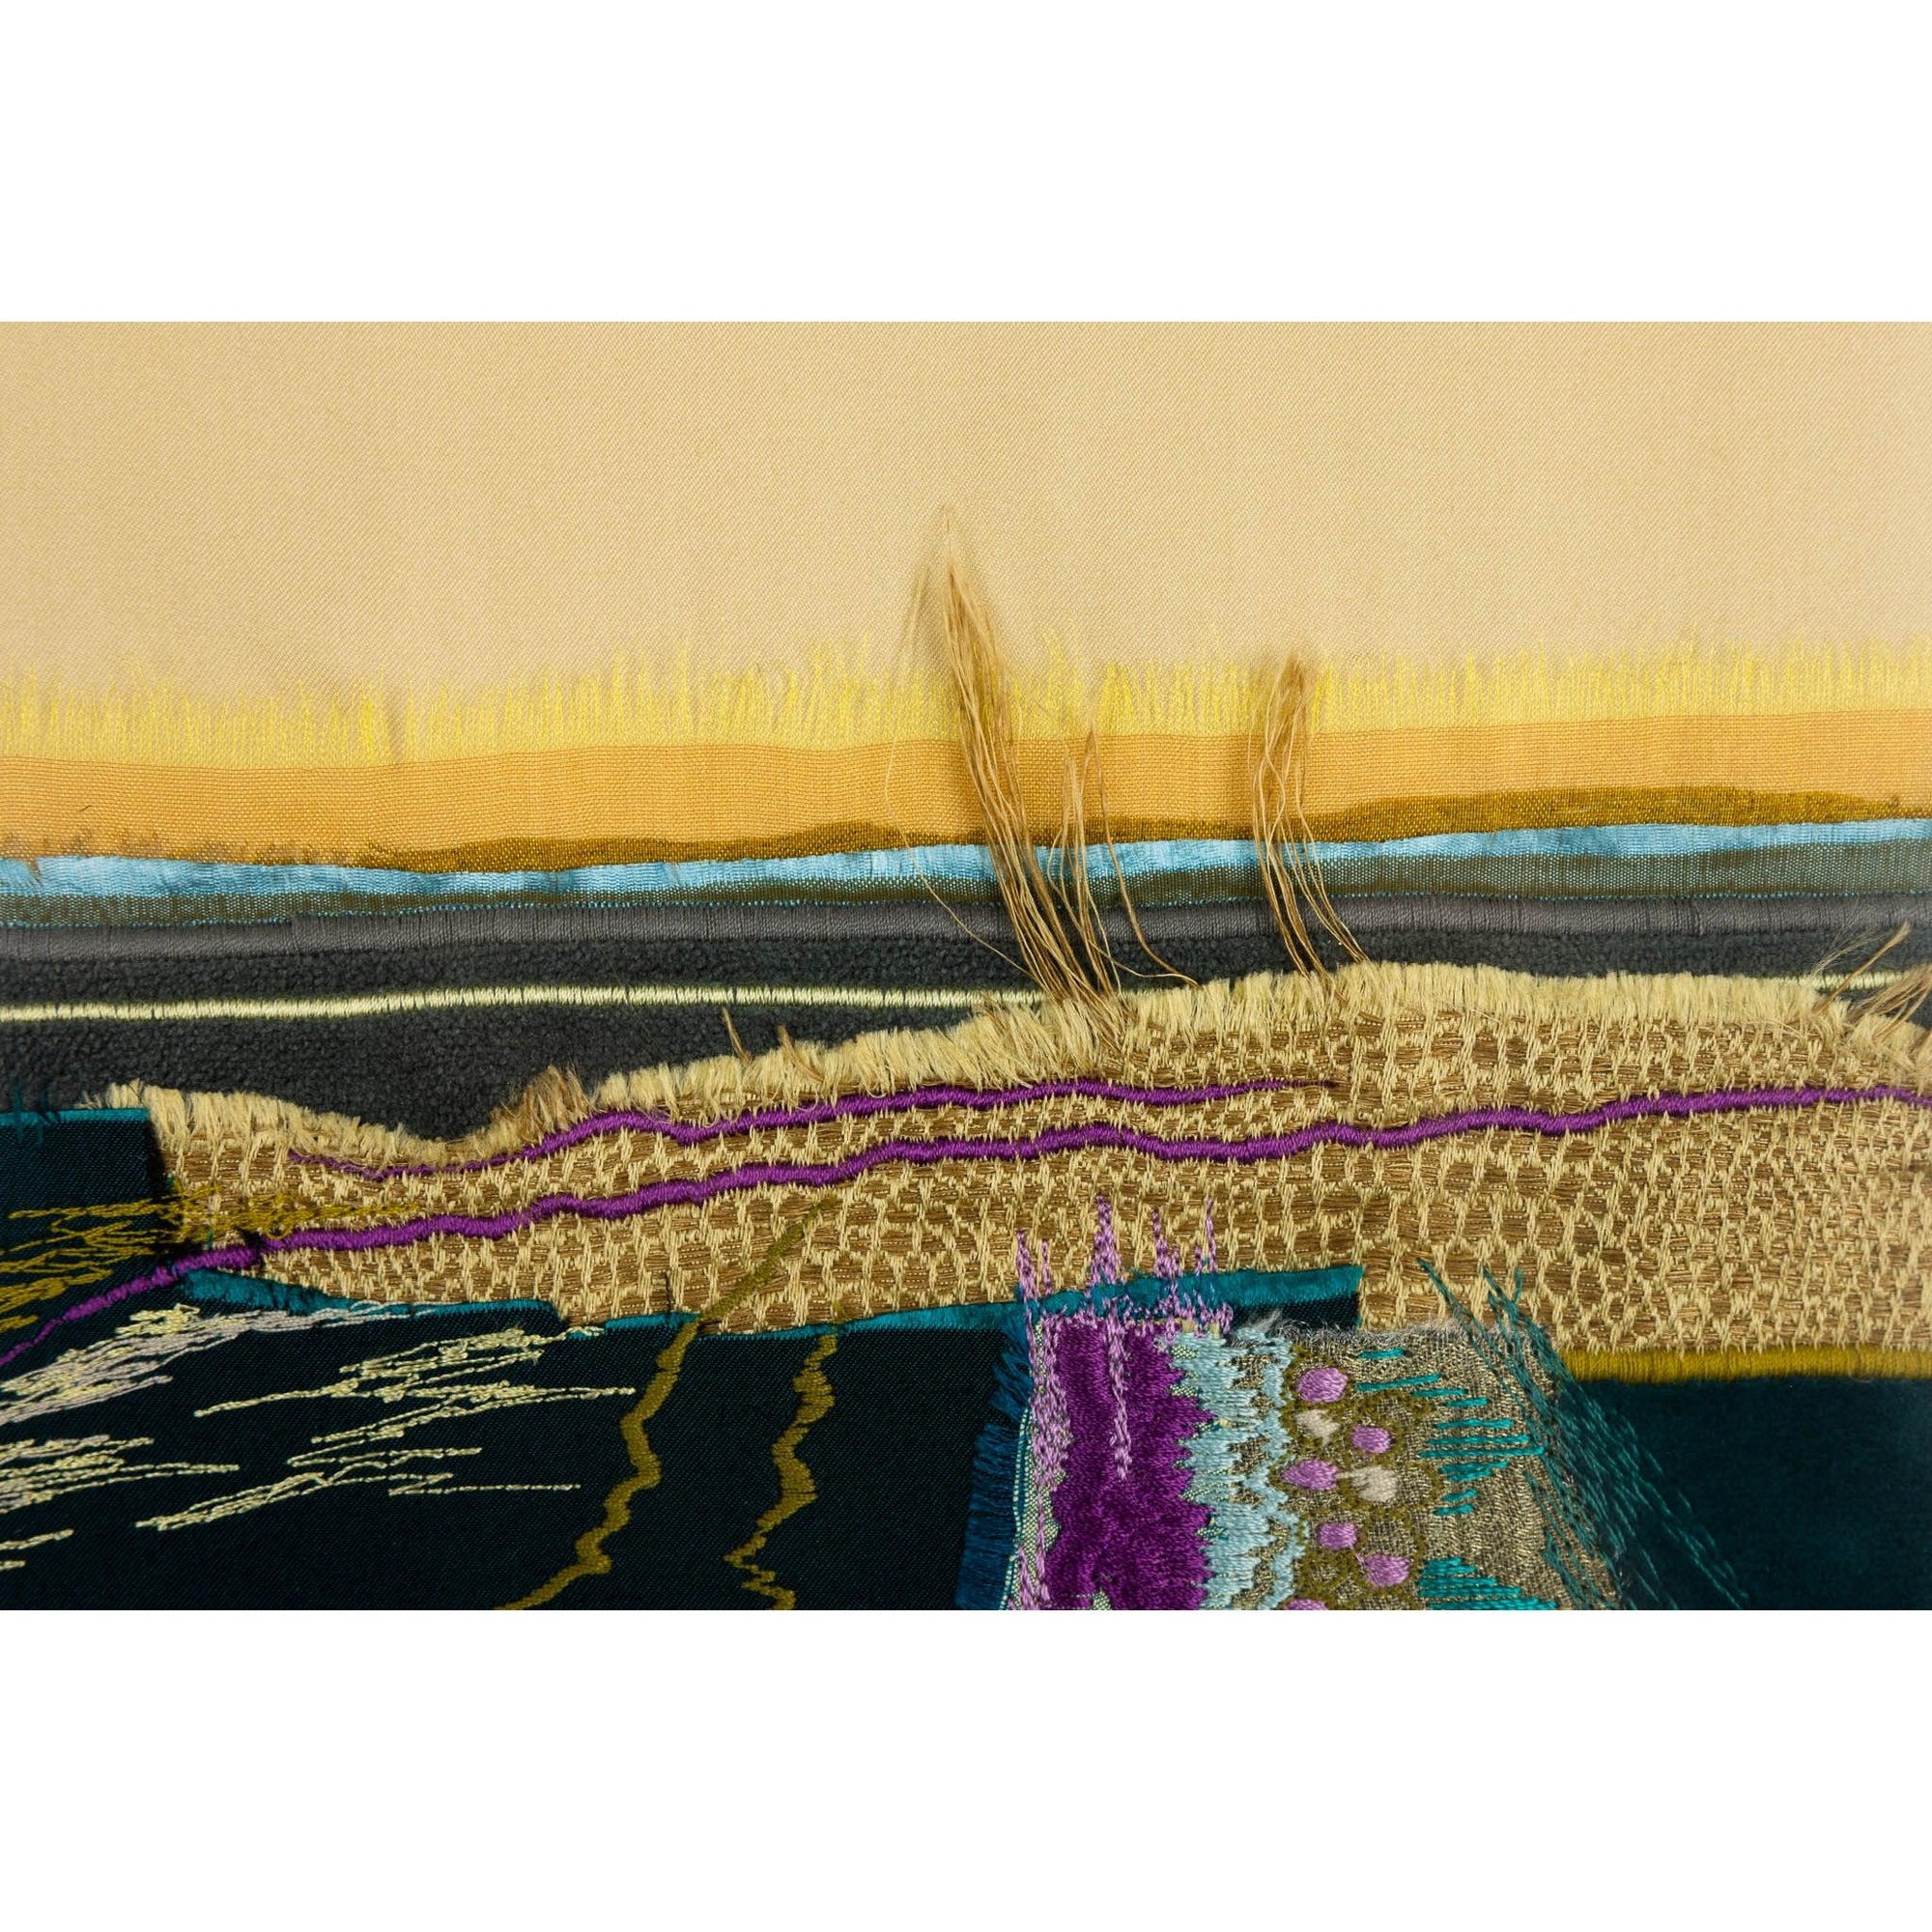 'Sandbar' dynamic stitched textiles by Sarah Pooley, available at Padstow Gallery, Cornwall